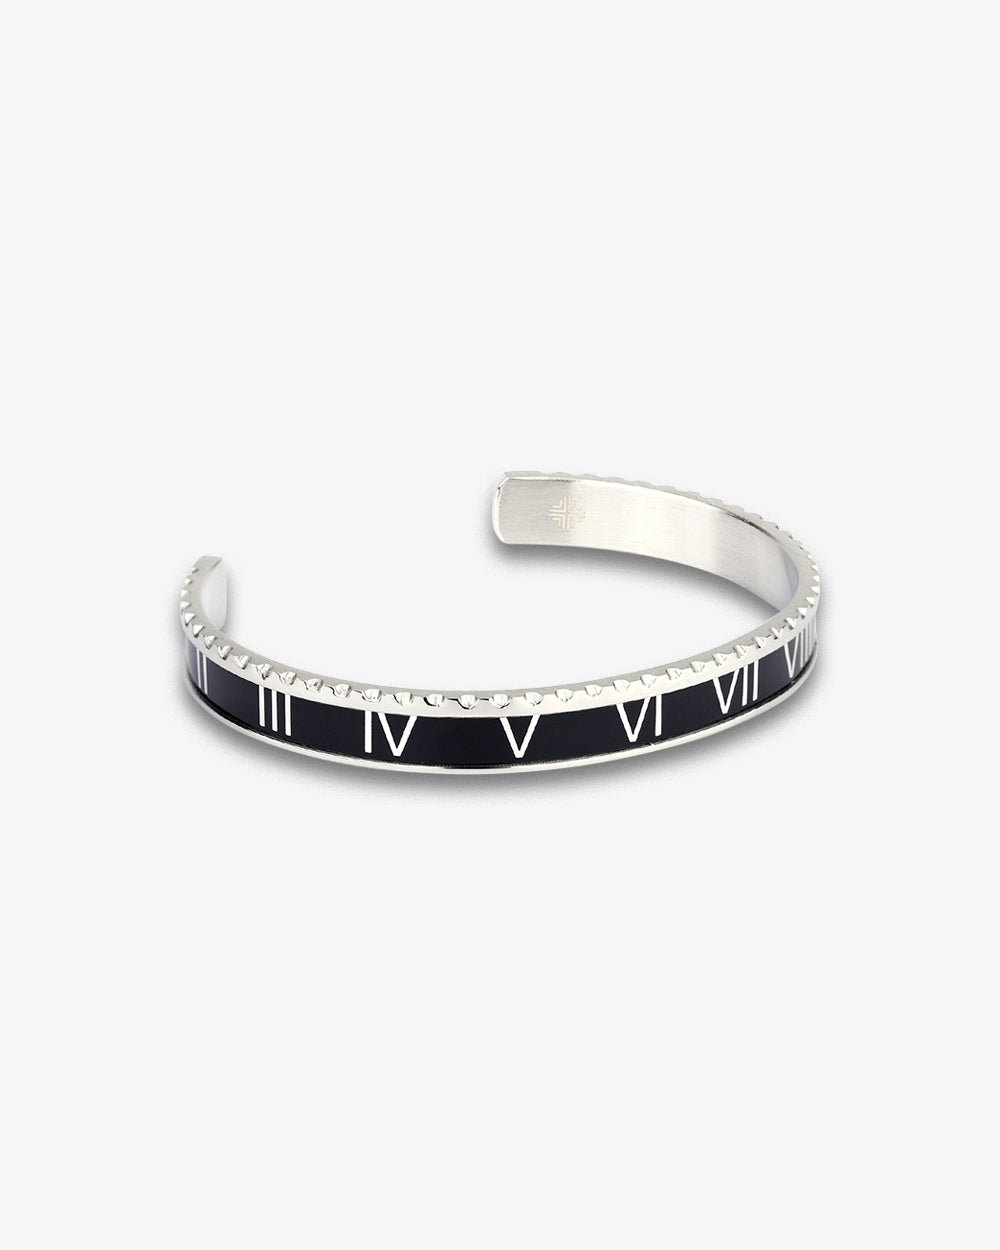 Swiss Concept Classic Roman Numeral Speed Bracelet (Black & Stainless Steel) - Polished Finish